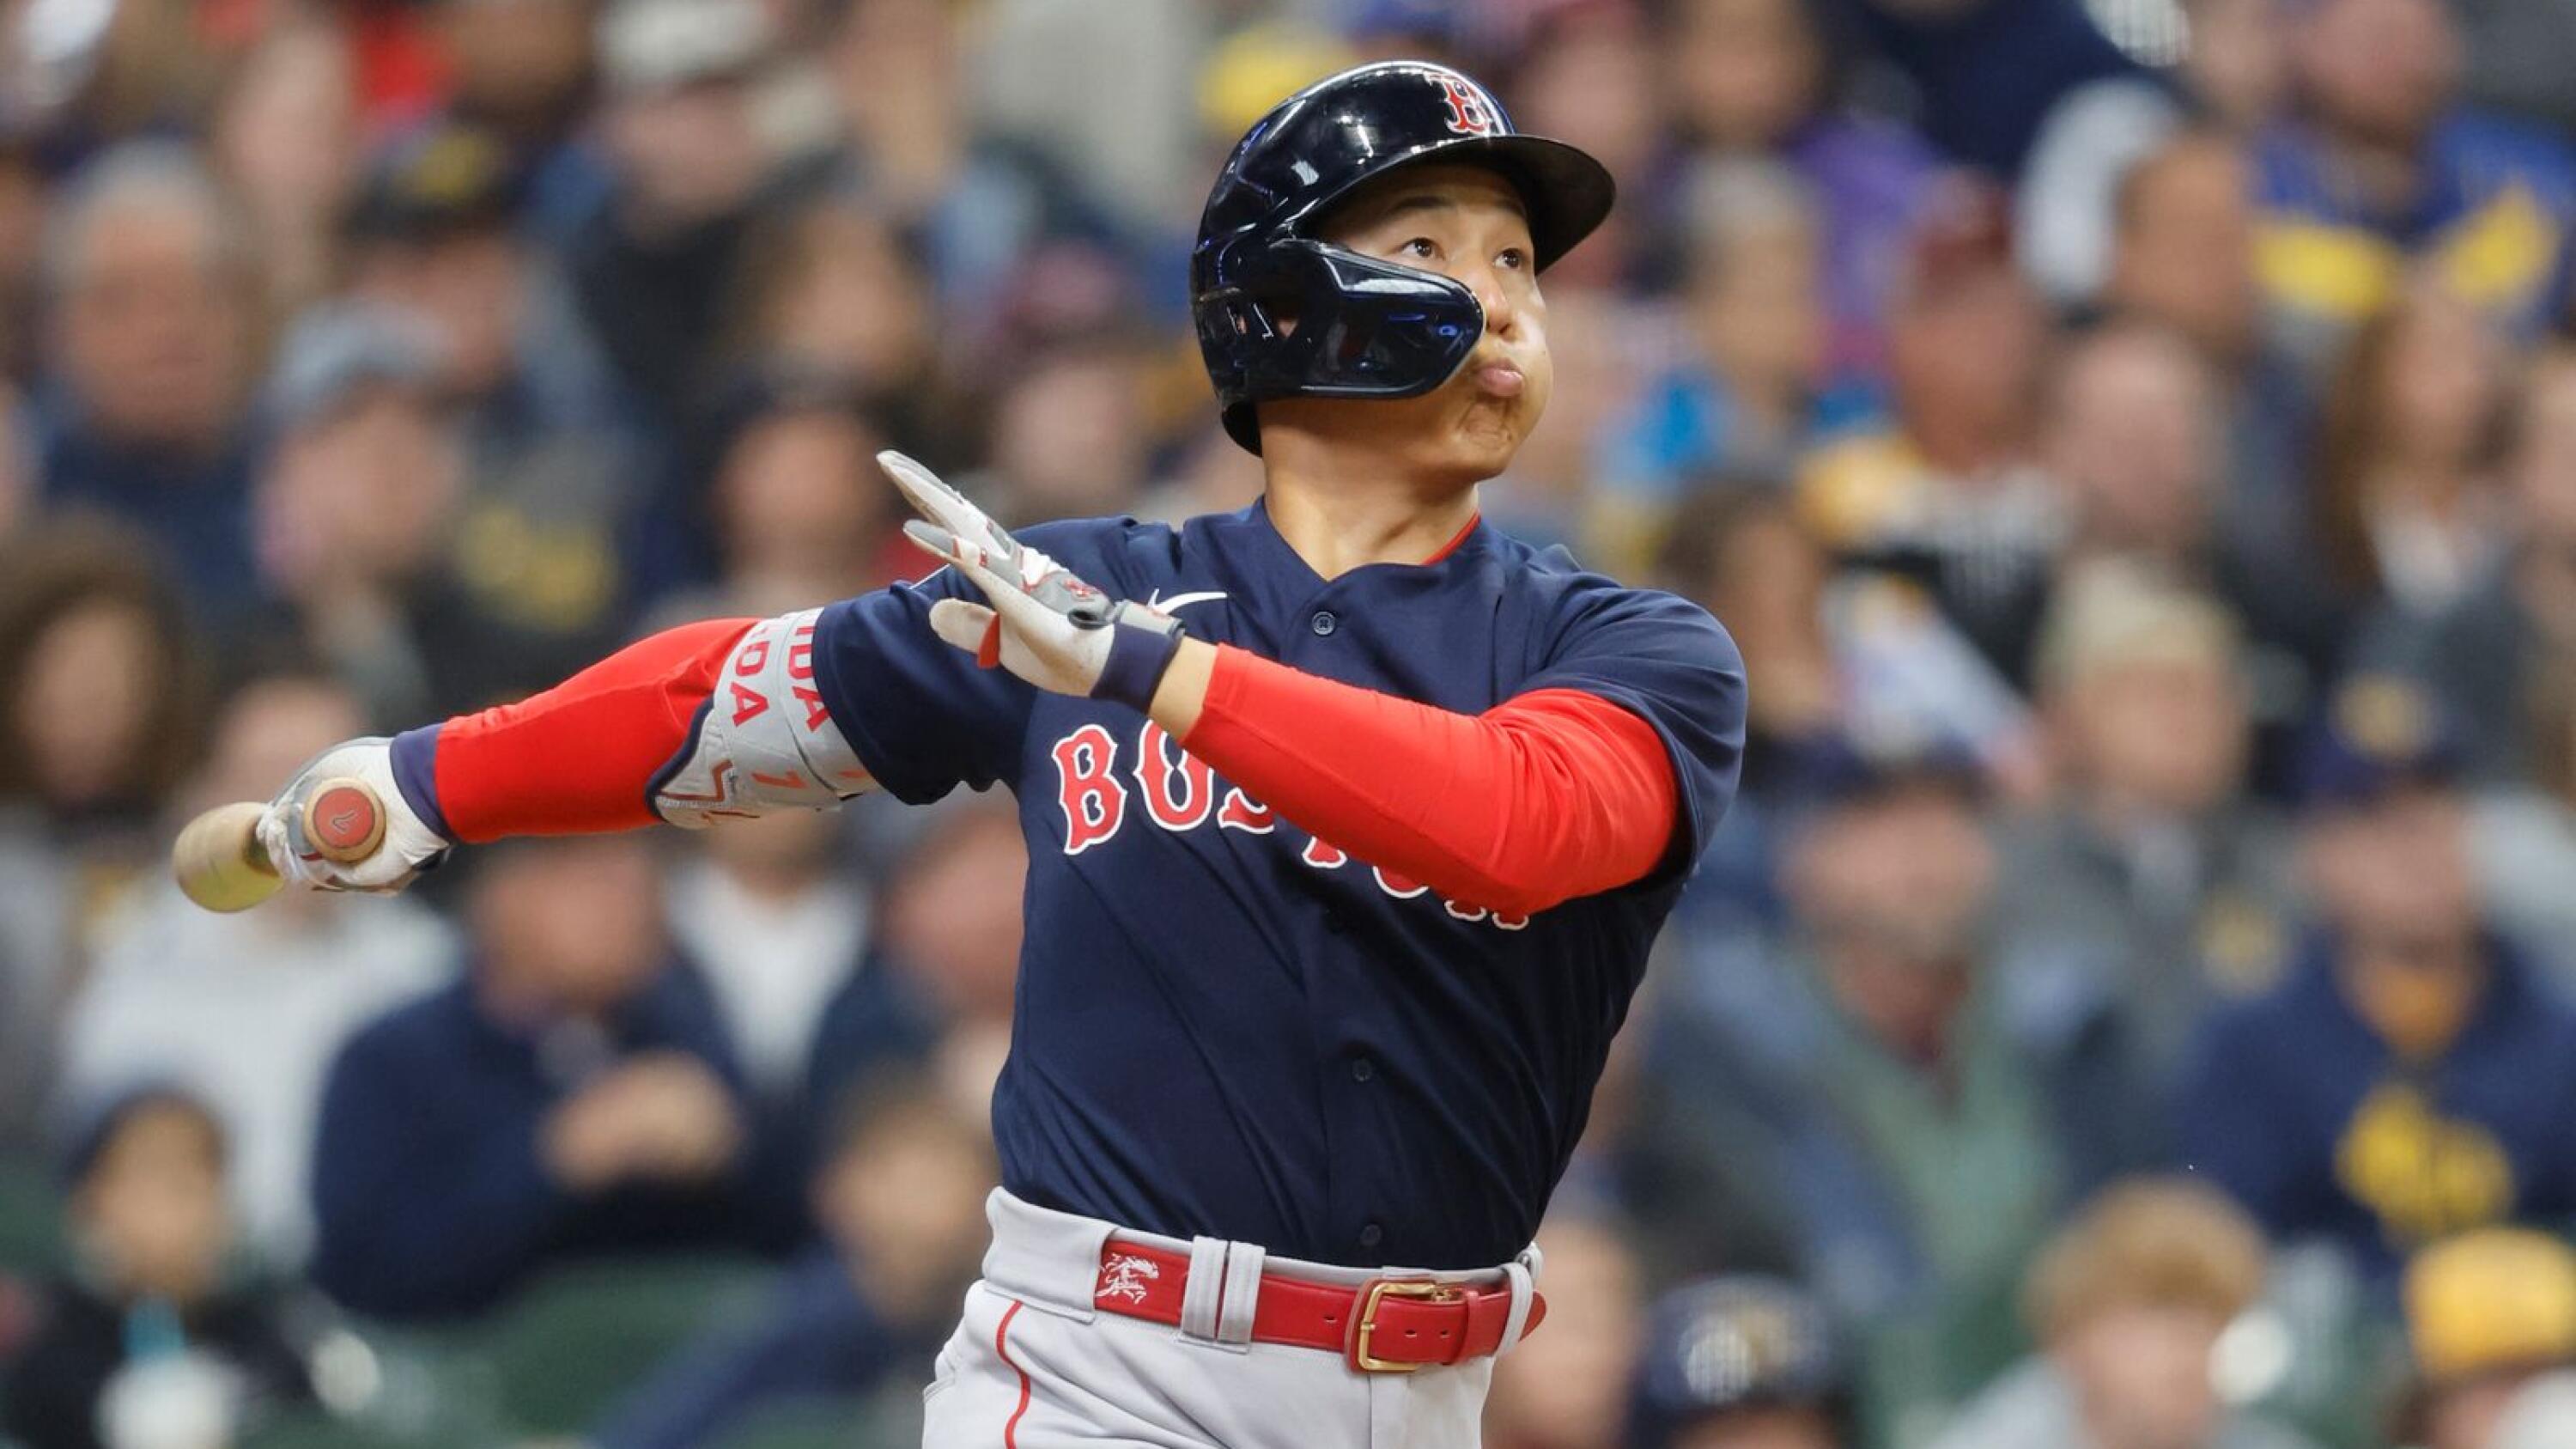 Yoshida homers twice in 8th as Red Sox topple Brewers 12-5